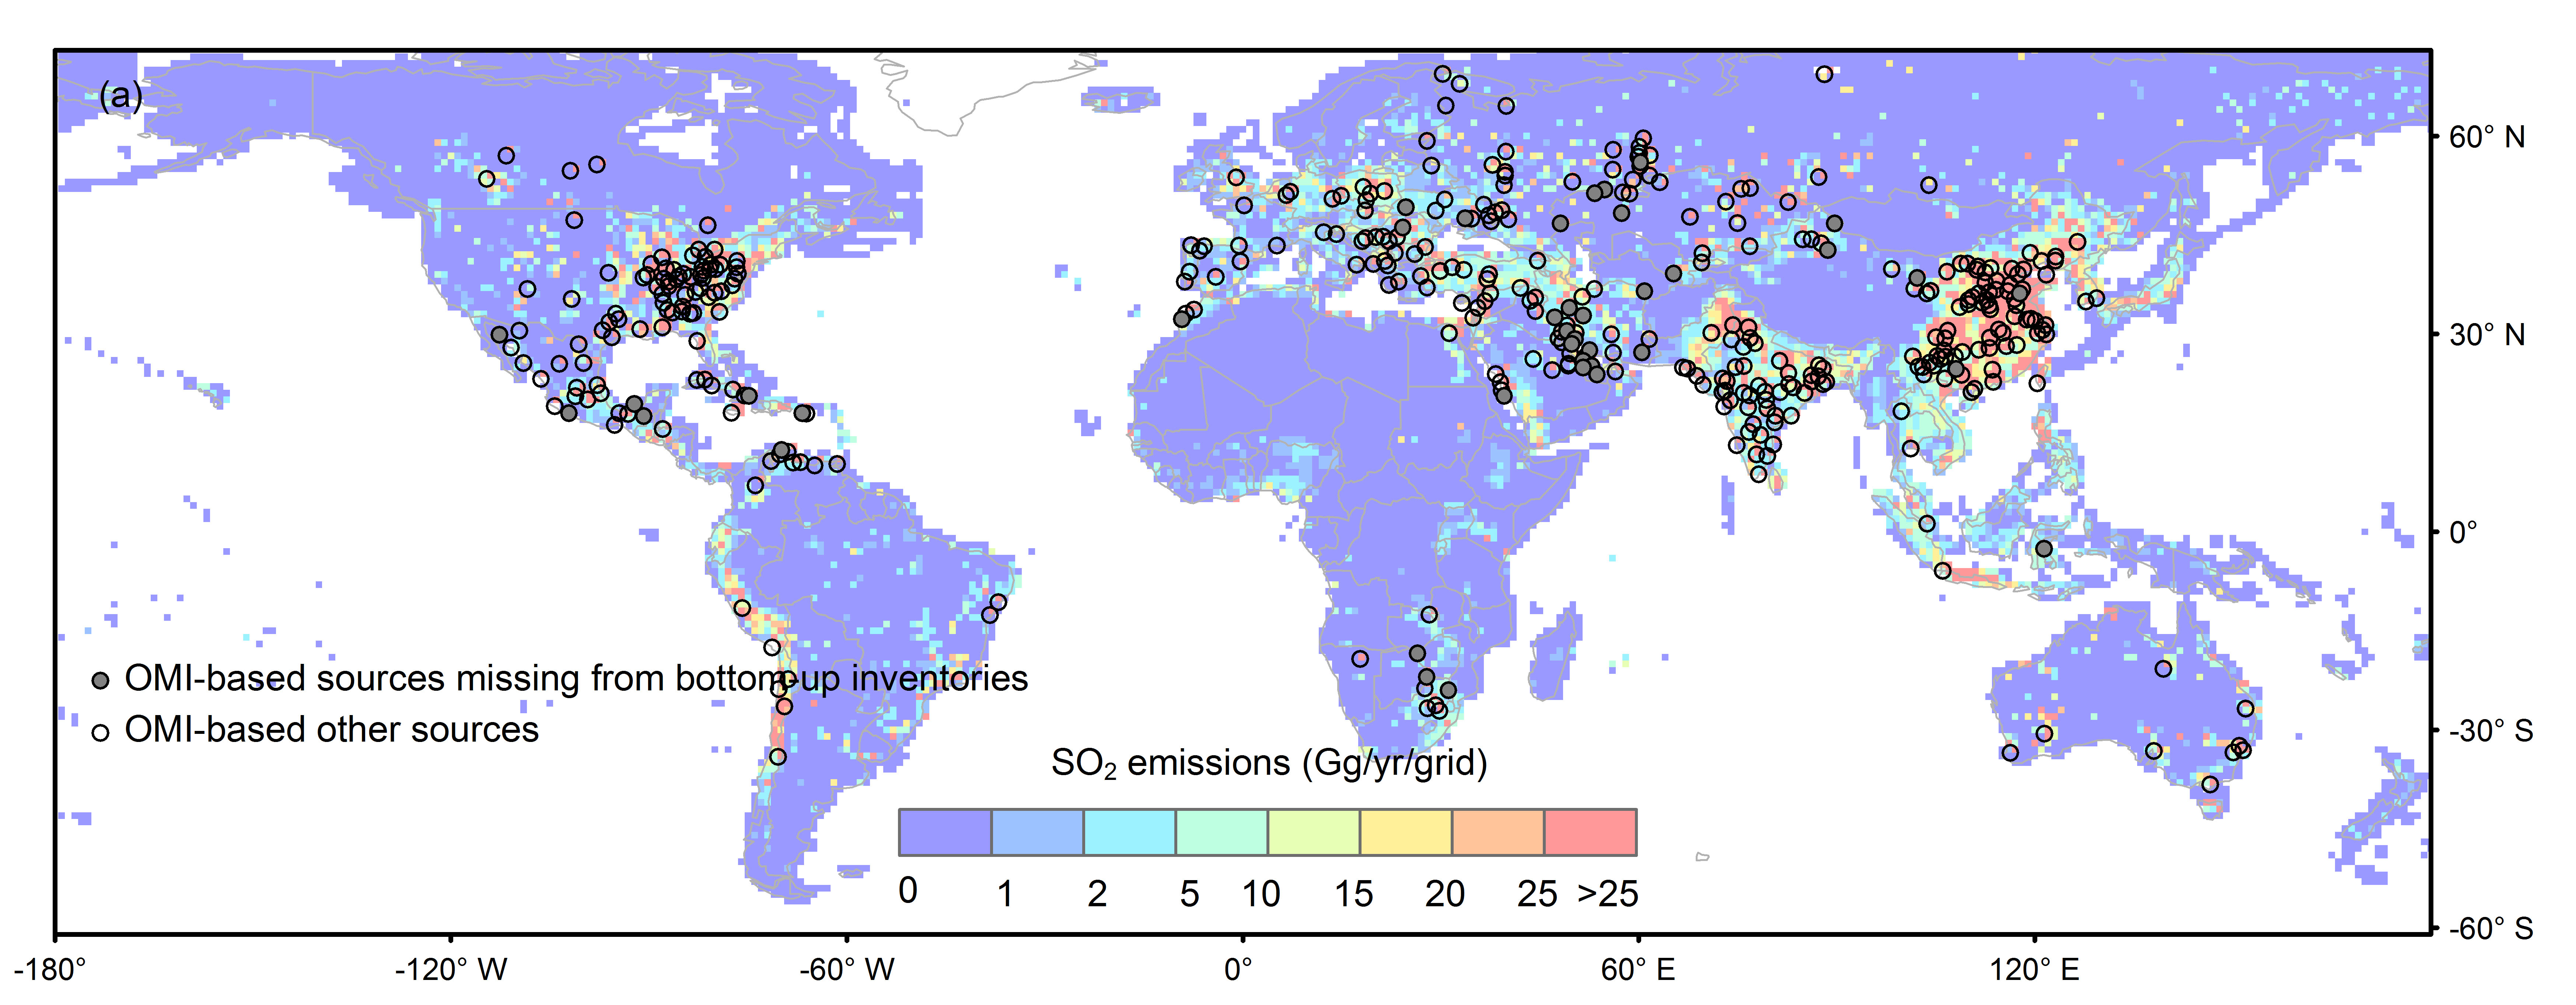 Improved model performance with the new SO2 emissions estimates in the OMI-HTAP inventory